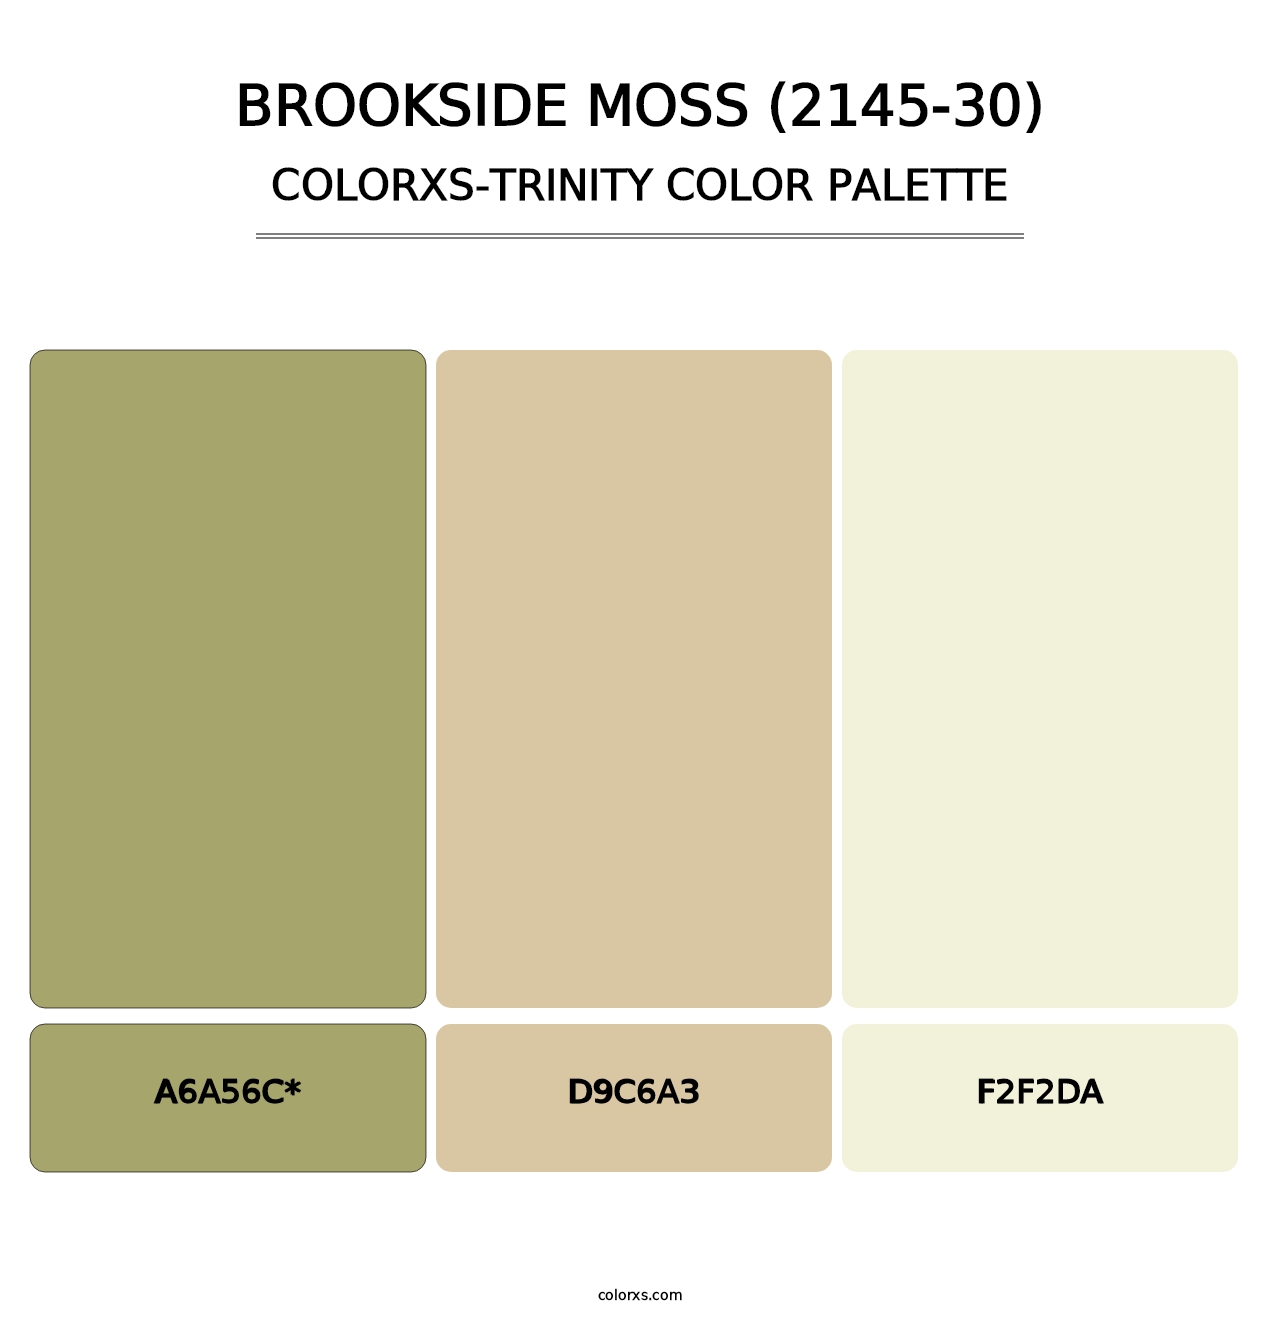 Brookside Moss (2145-30) - Colorxs Trinity Palette